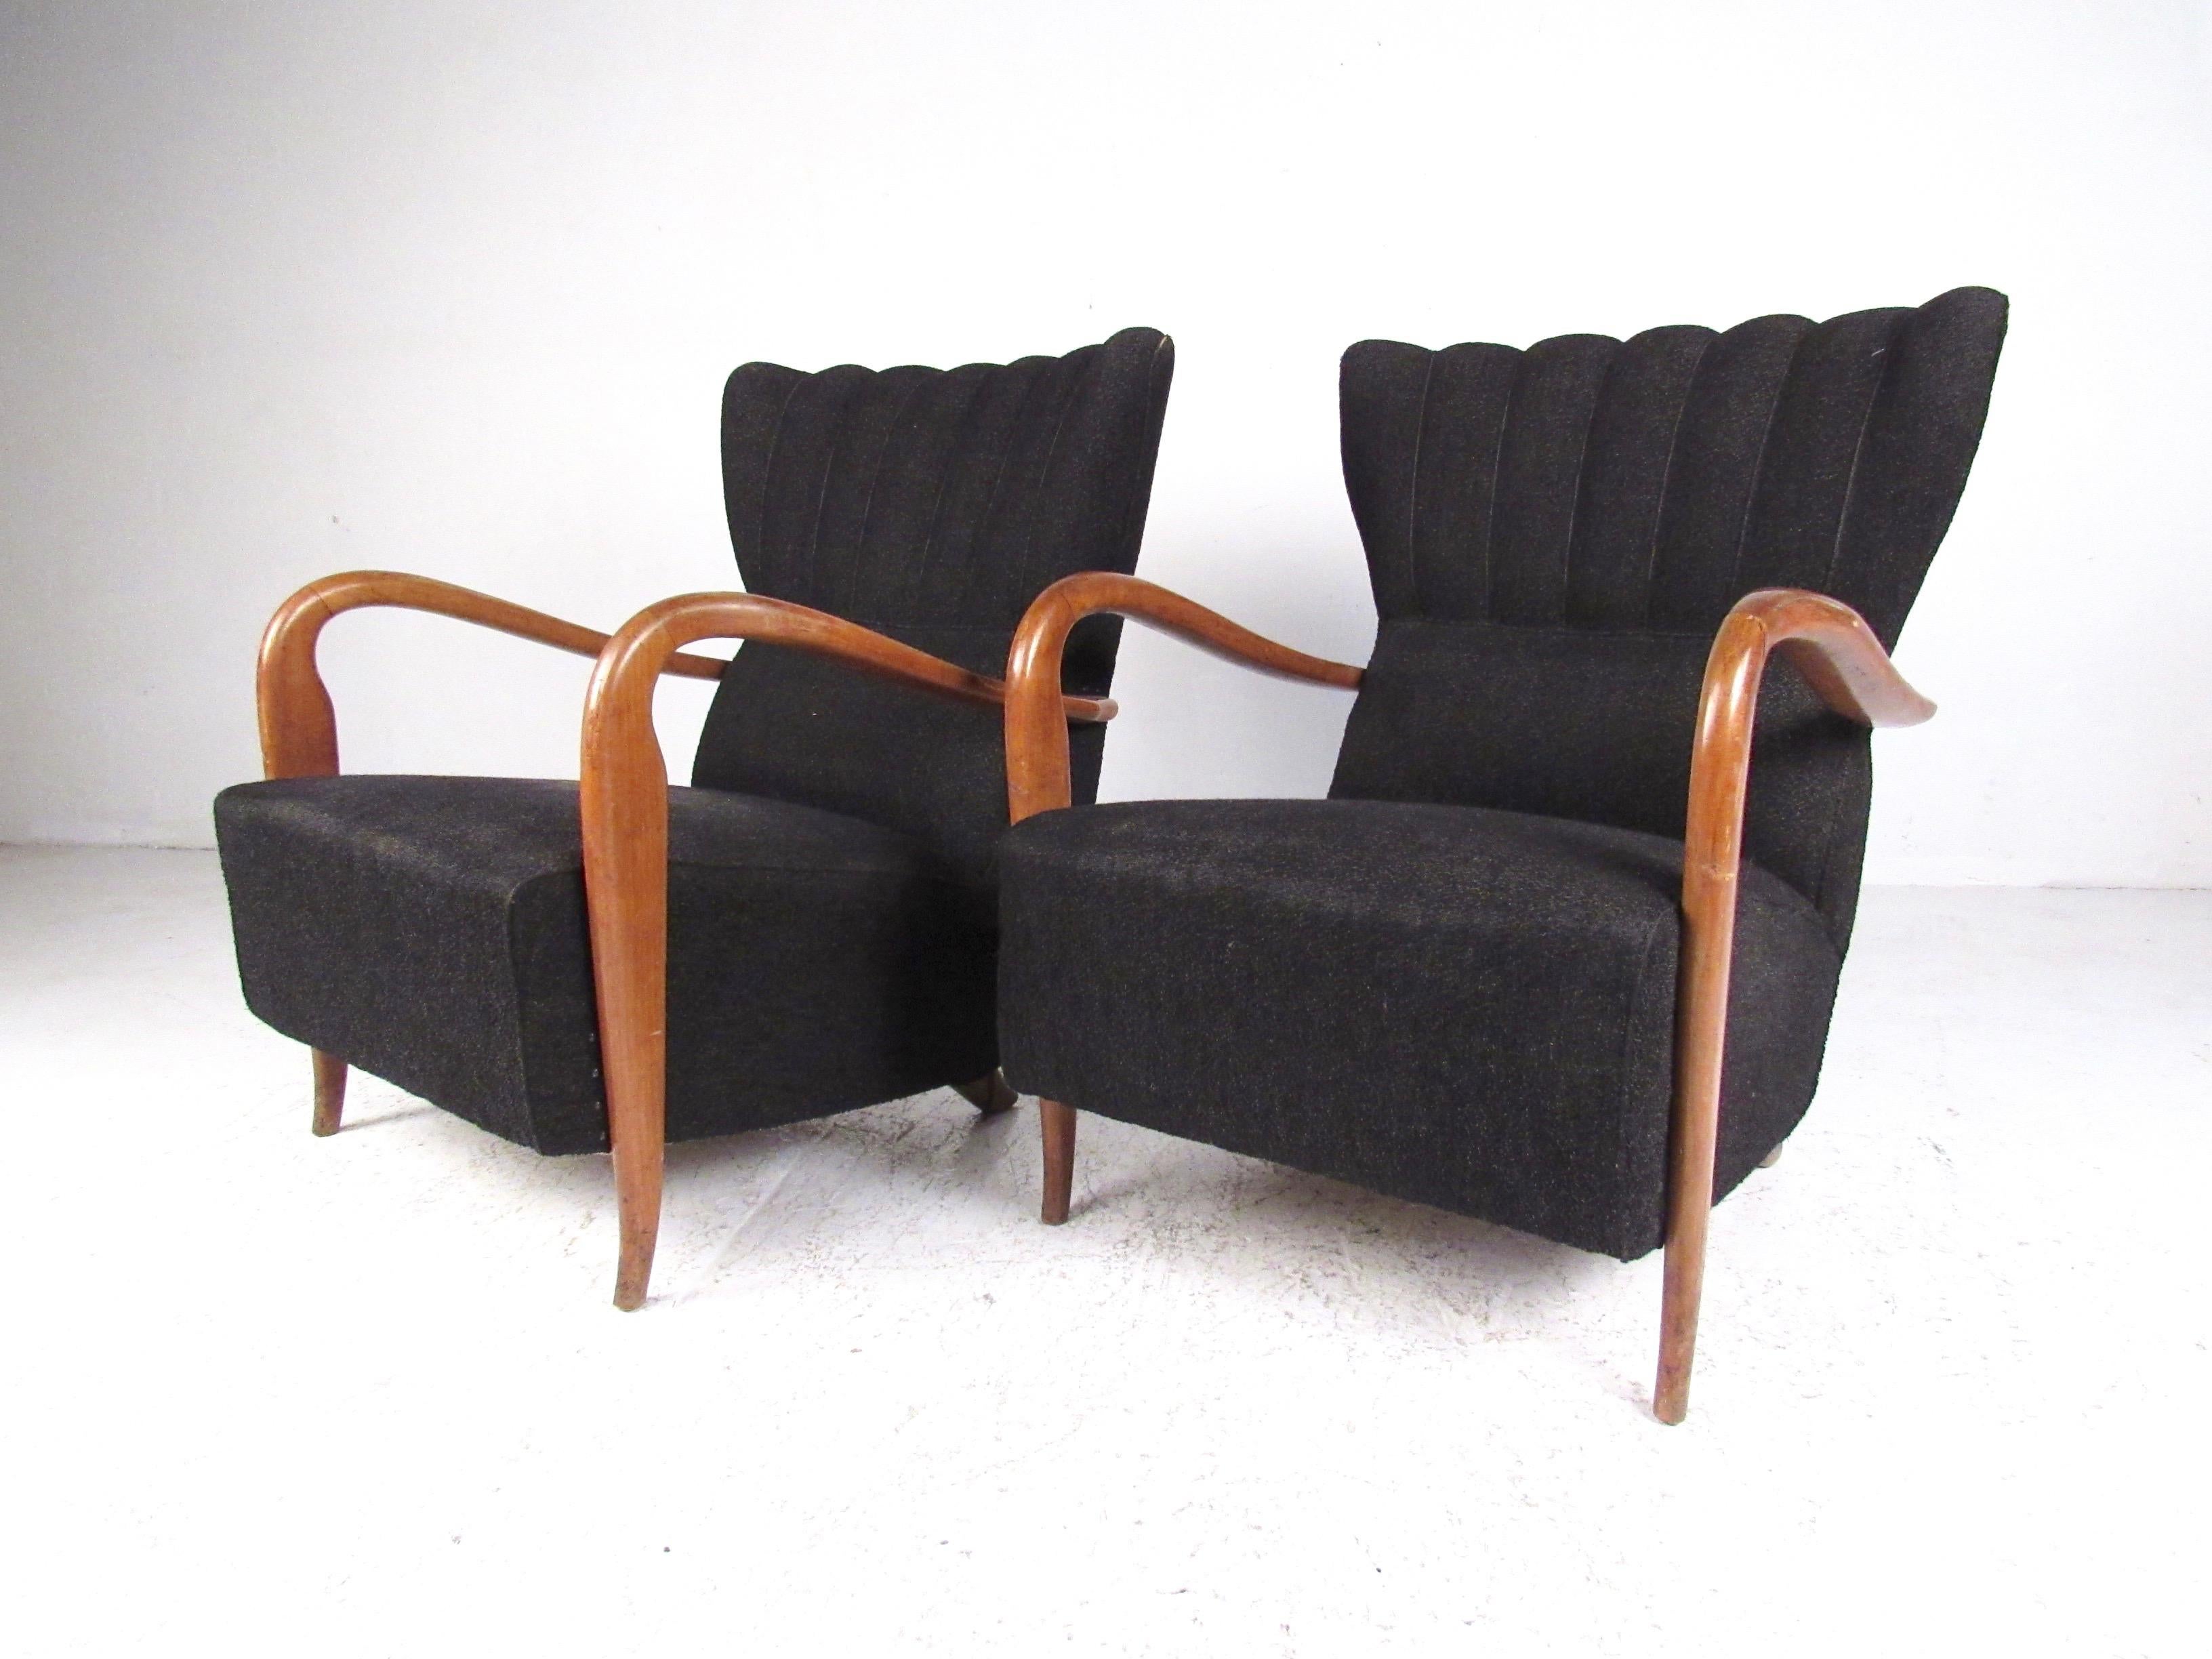 Sculptural hardwood arms wonderfully complimented by shapely seat backs and This beautiful matching pair of Mid-Century Modern armchairs make an elegant vintage addition to home or business interior.